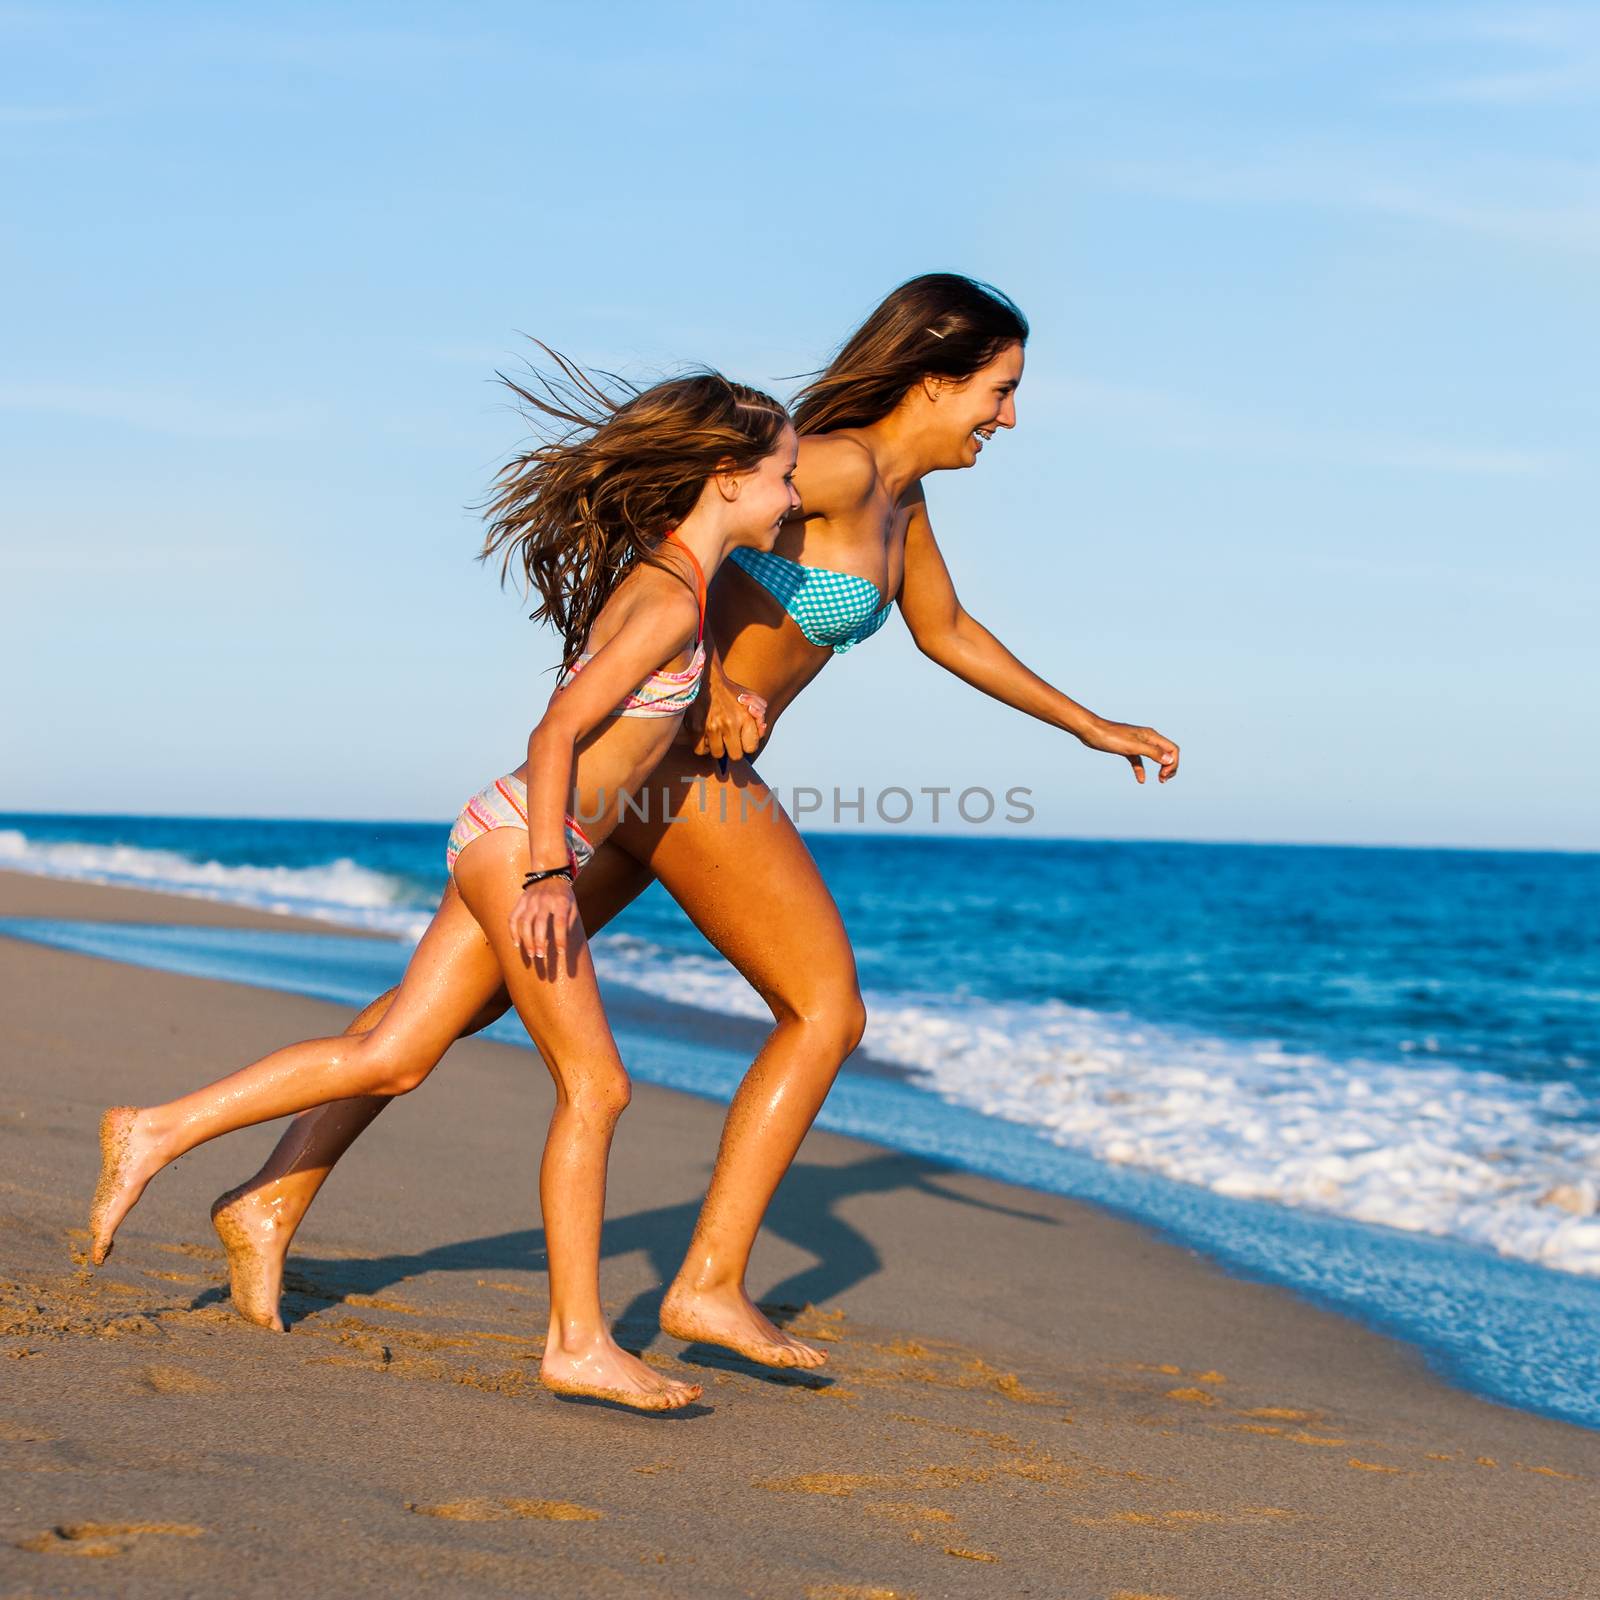 Action portrait of Young Mother running with daughter on beach.Two young girls in swimwear running to water.